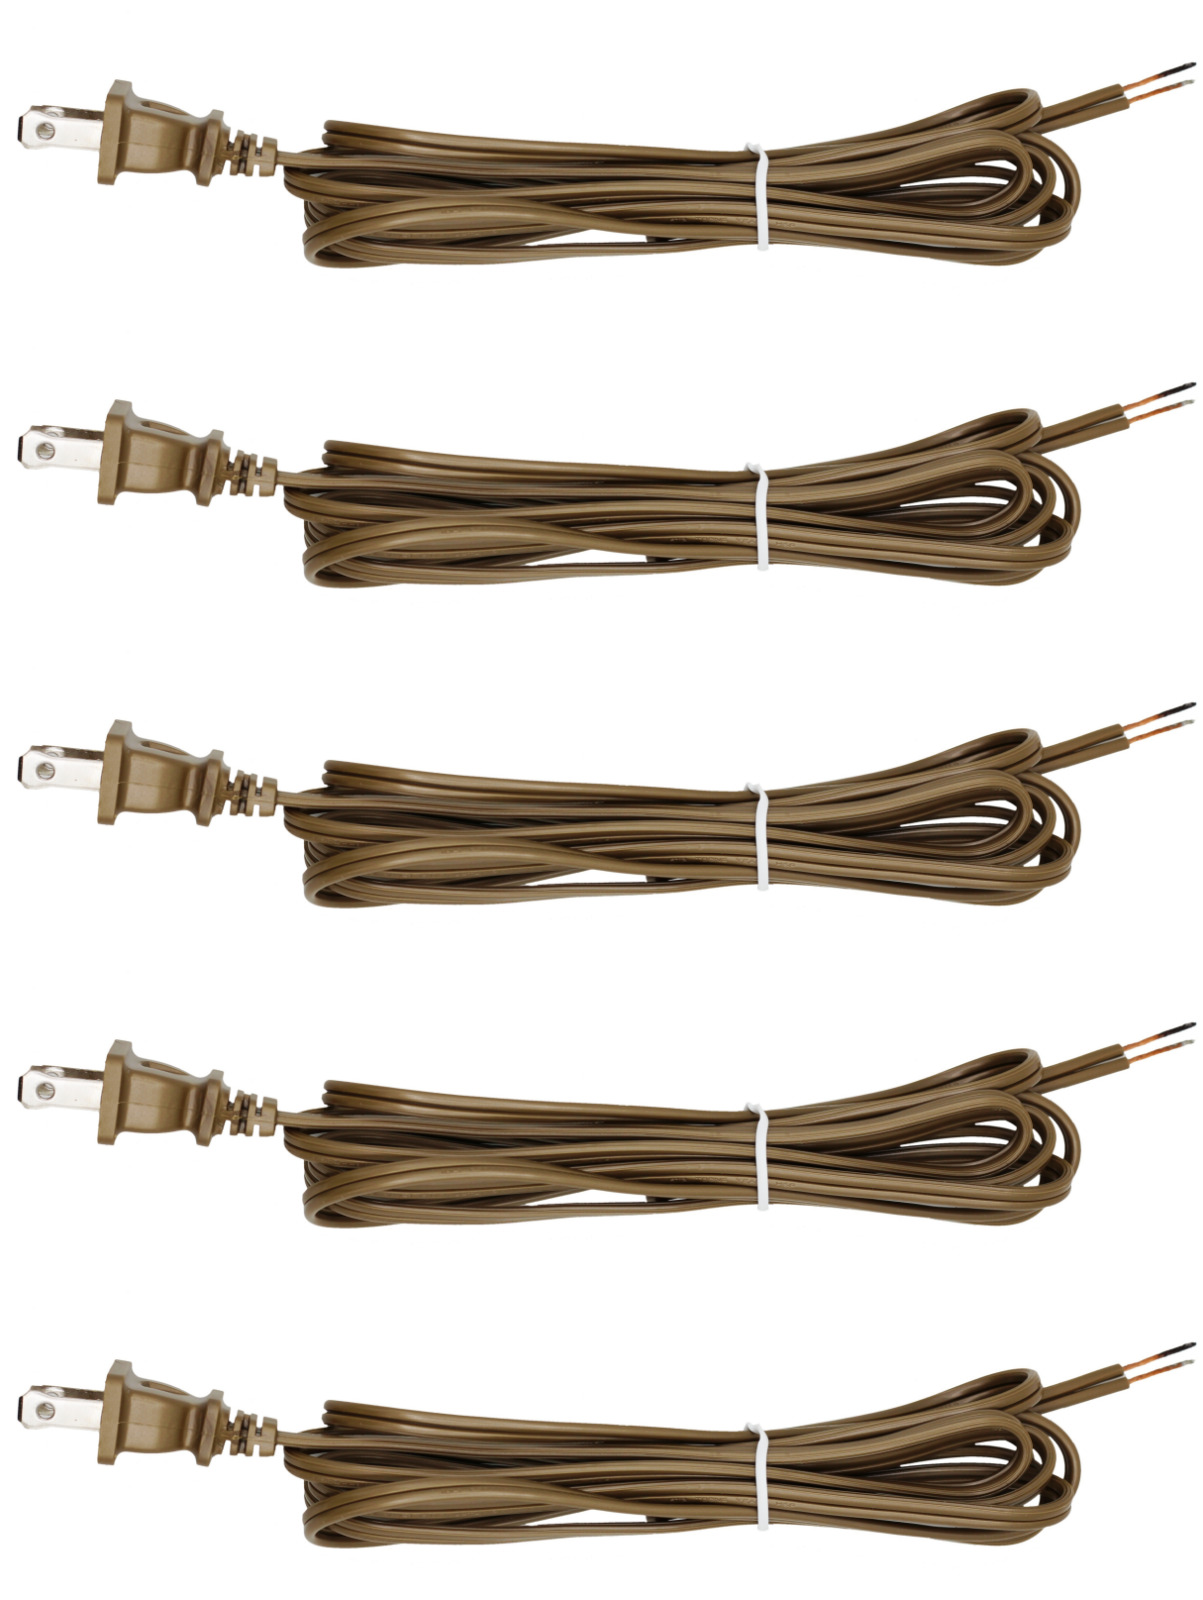 Antique Lamp Cord, 8 Foot Long Replacement Repair Part, 18/2 SPT-1 Wire - 5 Pack